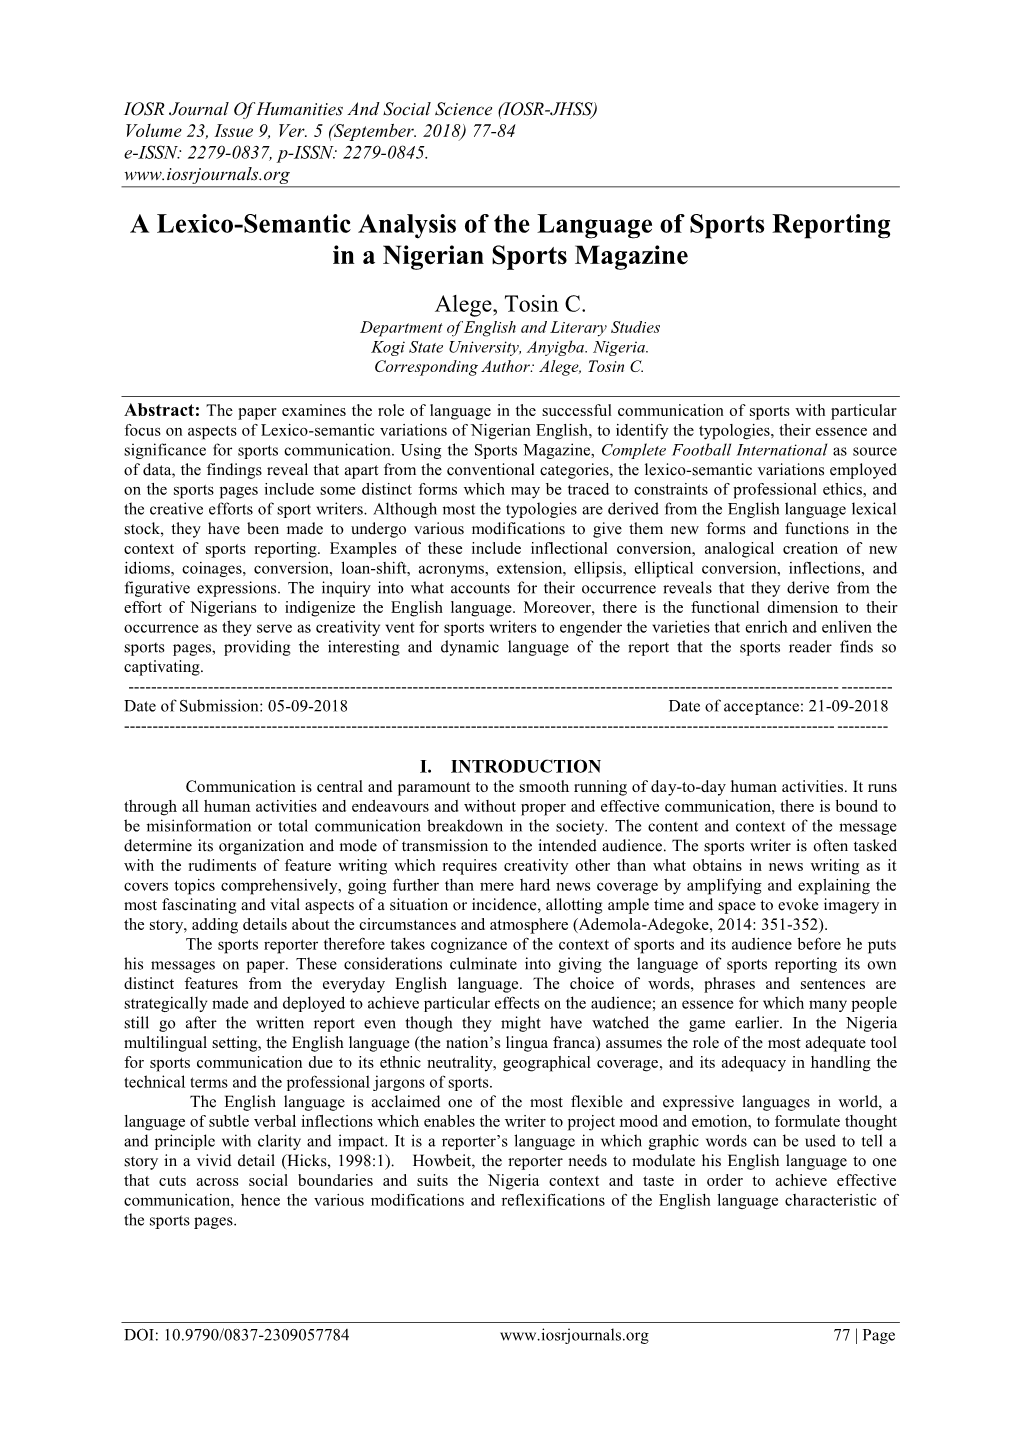 A Lexico-Semantic Analysis of the Language of Sports Reporting in a Nigerian Sports Magazine